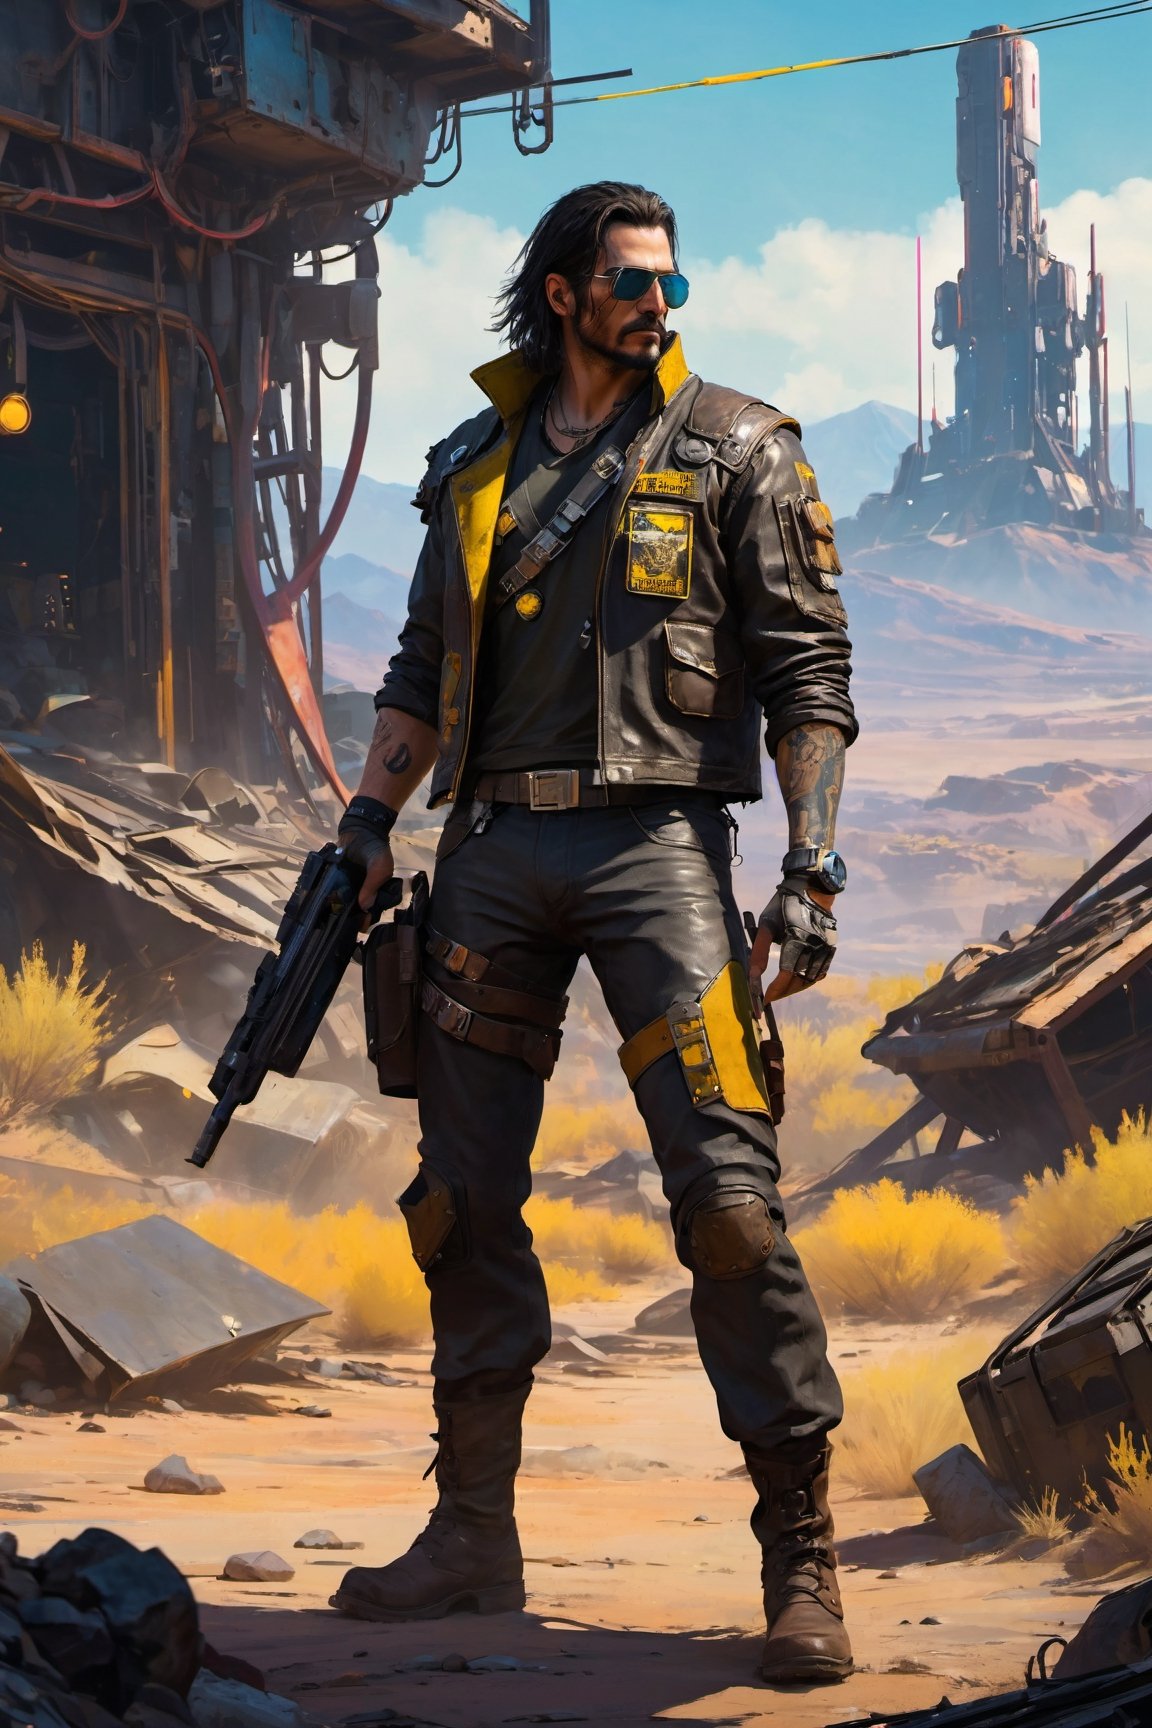 (8k HDR), (masterpiece, best quality), 

"Visualize Johnny Silverhand from Cyberpunk 2077 adapted into the Fallout universe as a rugged wasteland wanderer. He dons a patched-up leather jacket with radiation-resistant lining, adorned with various faction pins and badges from the Fallout world. His iconic cybernetic arm has been further modified with attachments useful for survival in the wasteland, including a Geiger counter and a built-in pip-boy interface. Strapped to his back is a makeshift electric guitar, cobbled together from old world tech and scrap parts. He navigates a rocky terrain littered with the debris of fallen airships and distant views of dilapidated structures, his gaze fixed on the horizon, a defiant symbol of survival and resistance against the chaos of the wasteland."

dark atmosphere, vibrant colors, (various camera shots), depth of field, 2D